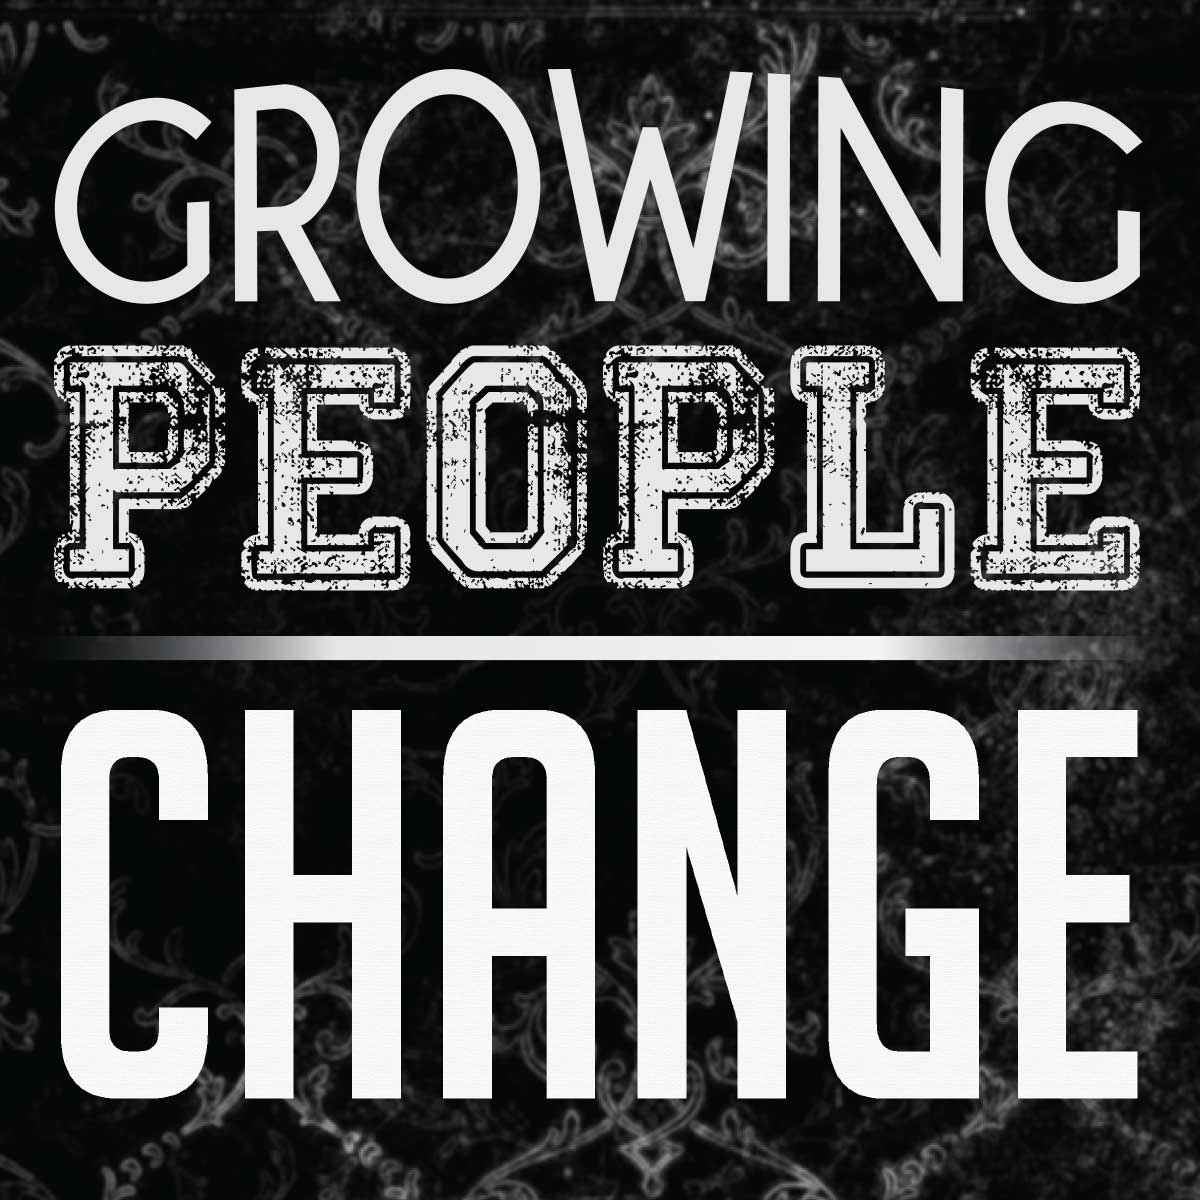 Growing People Change - Journey Church in Pineville Core Value